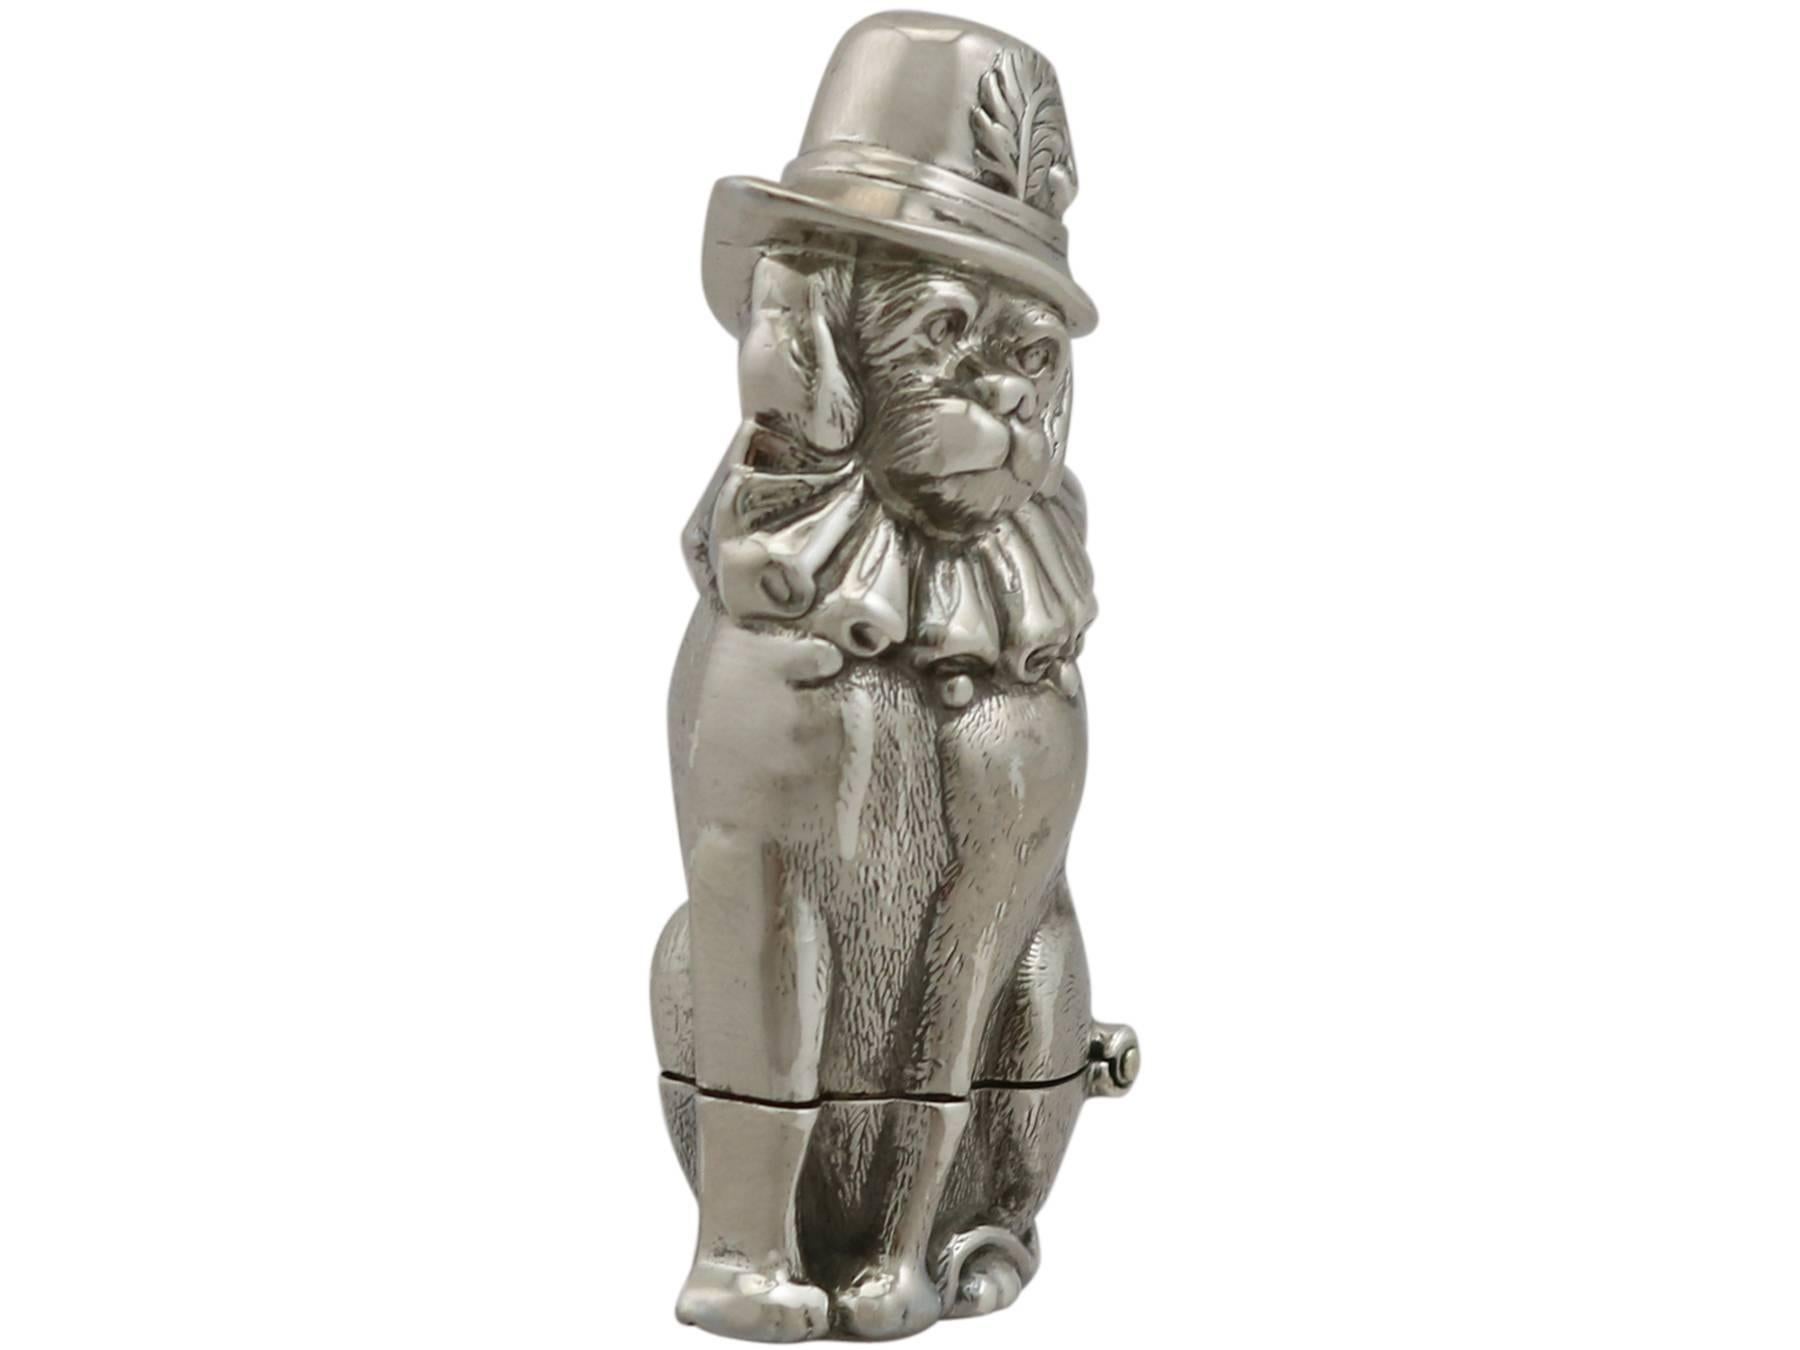 An exceptional, fine and impressive antique Victorian English sterling silver vesta case in the form of a Punch's dog; an addition to our diverse smoking related silverware collection.

This fine antique Victorian sterling silver vesta case is